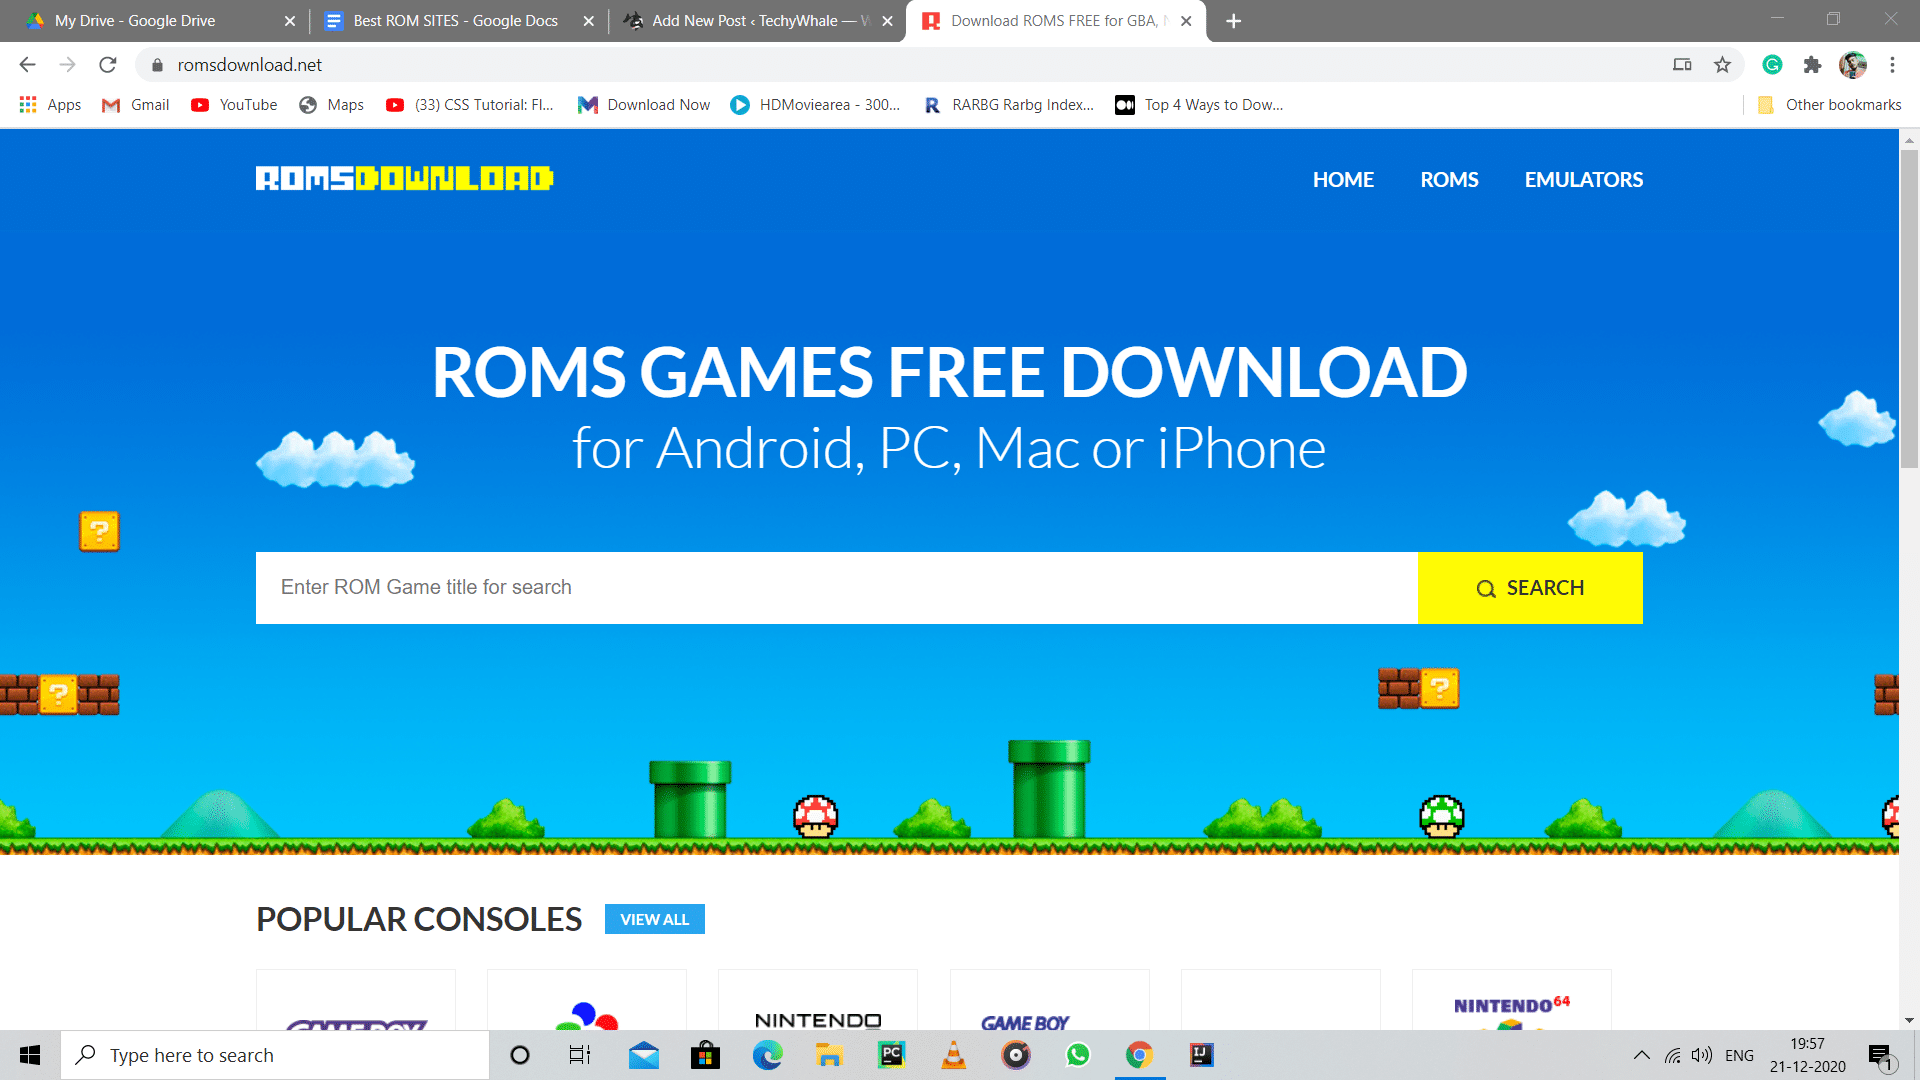 How to Download ROMS Games for Free